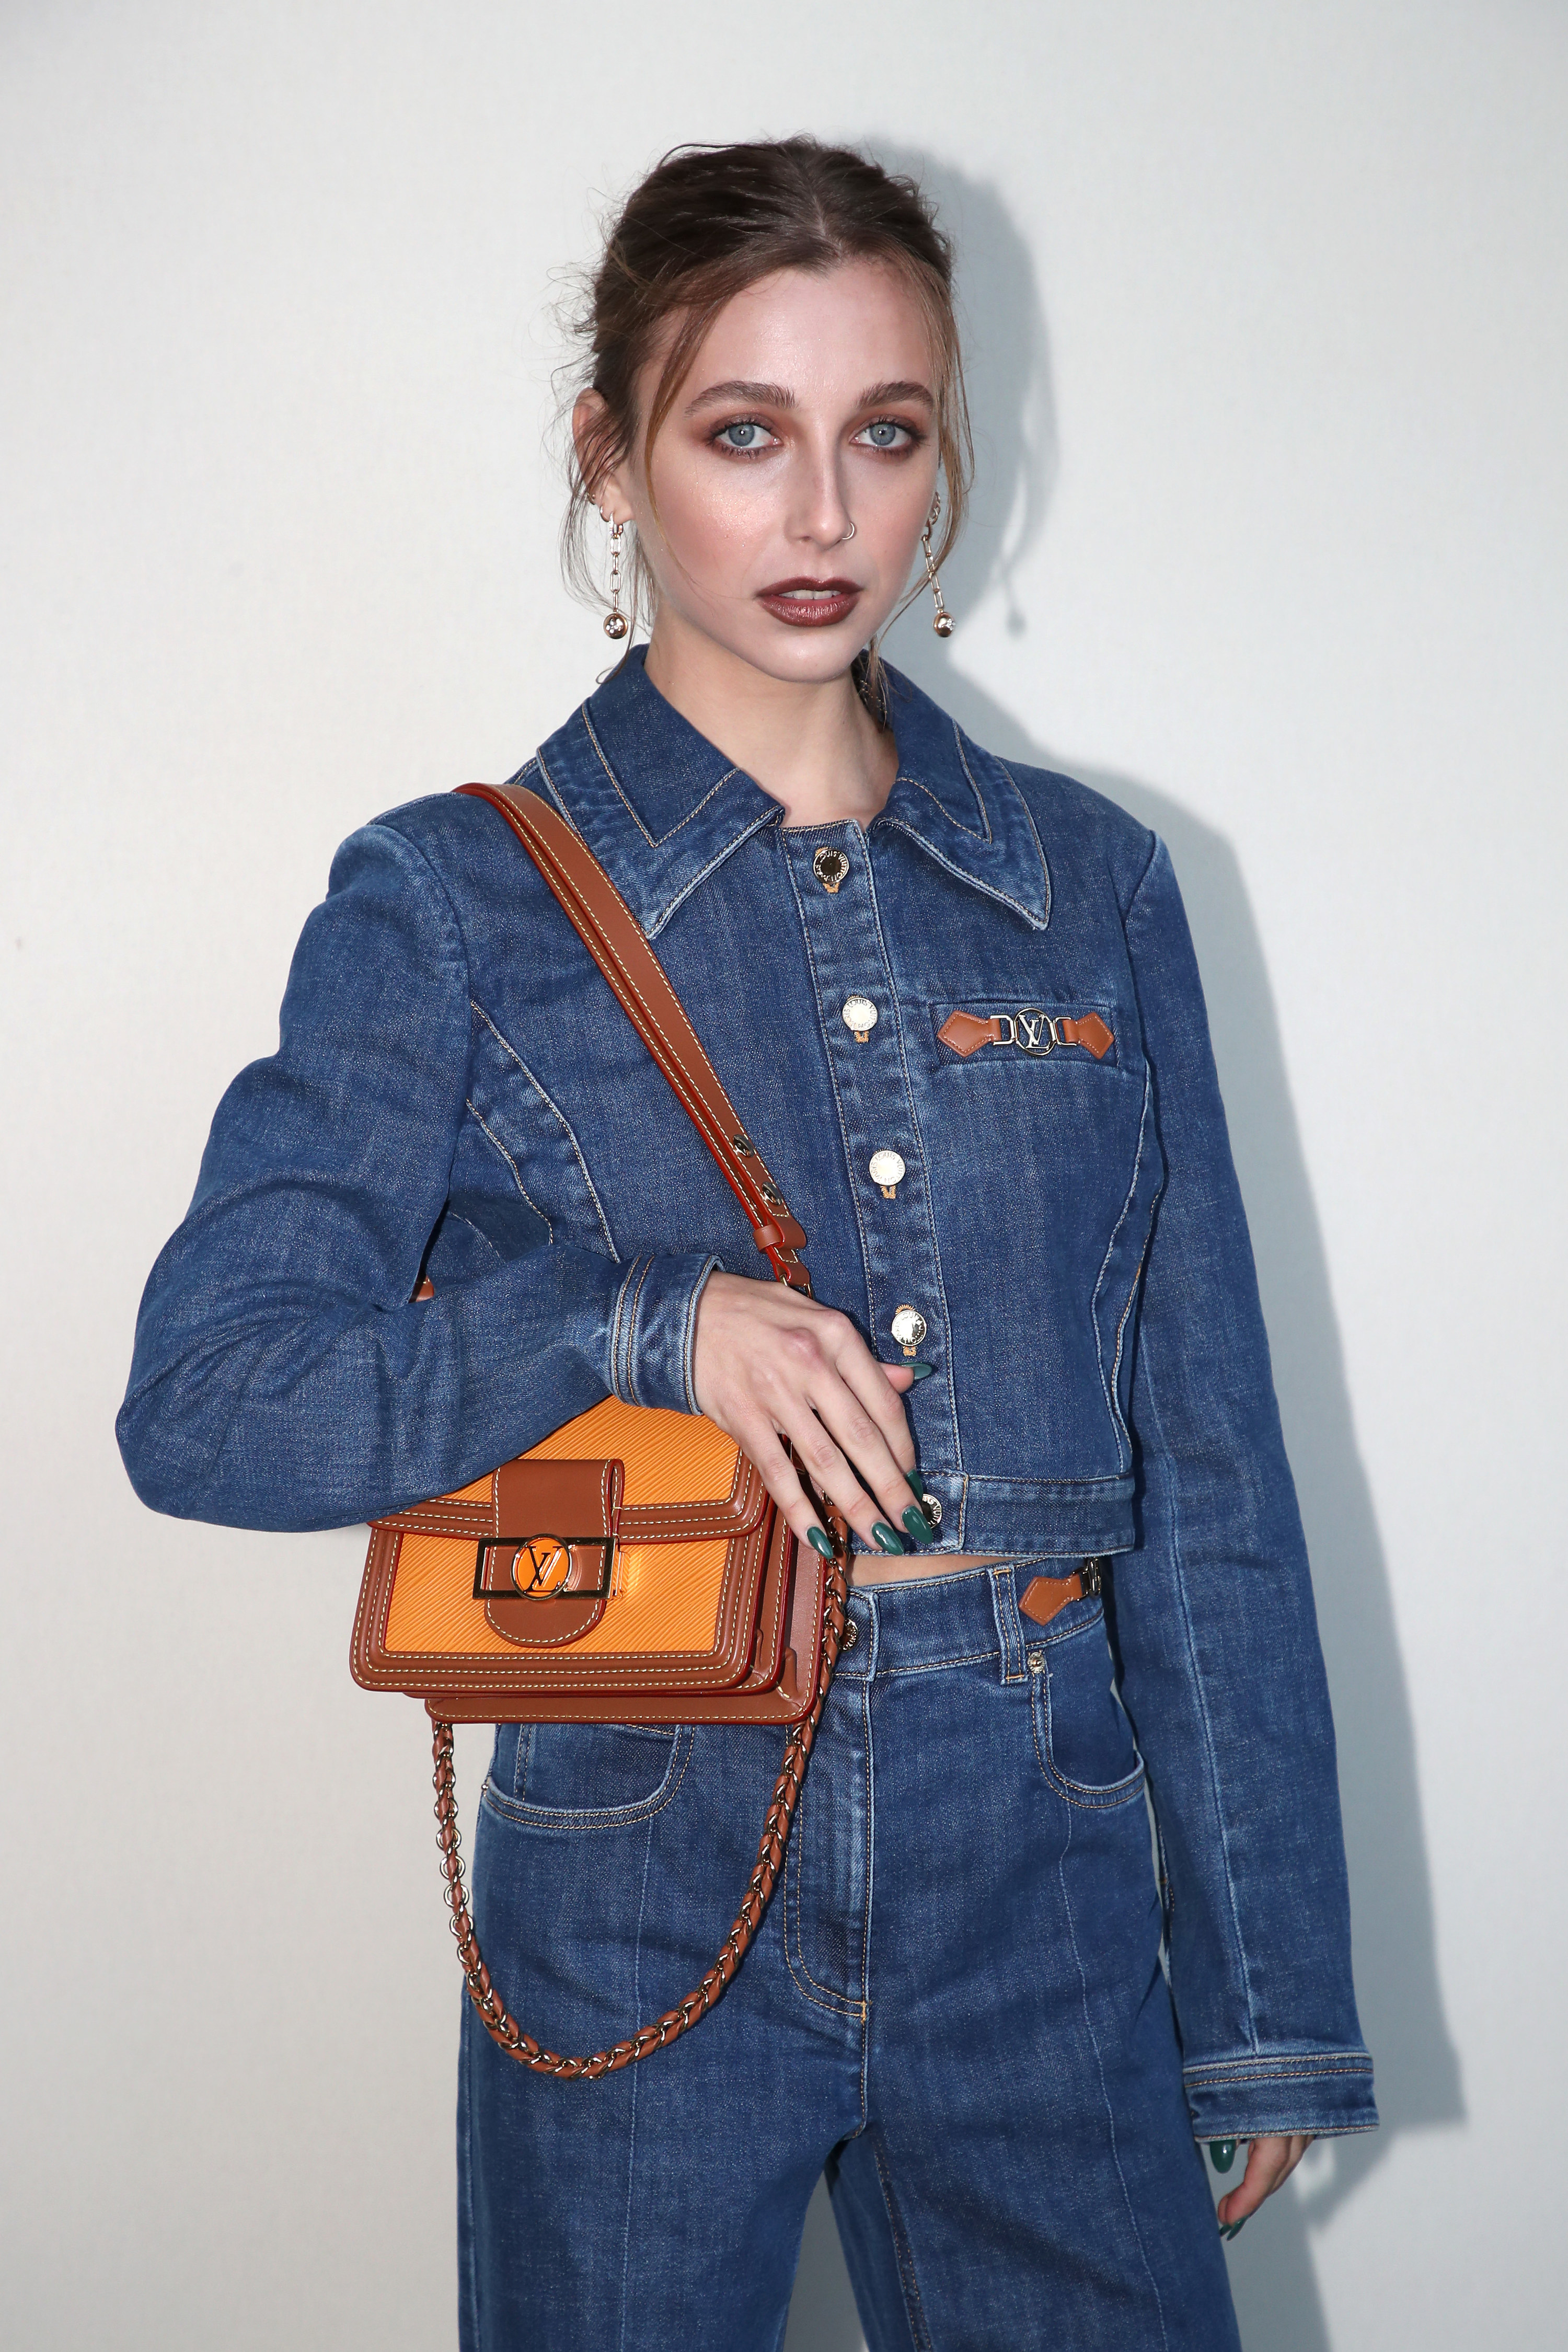 Emma Chamberlain poses at the Louis Vuitton Womenswear Spring/Summer 2022 event for Paris Fashion Week on October 05, 2021